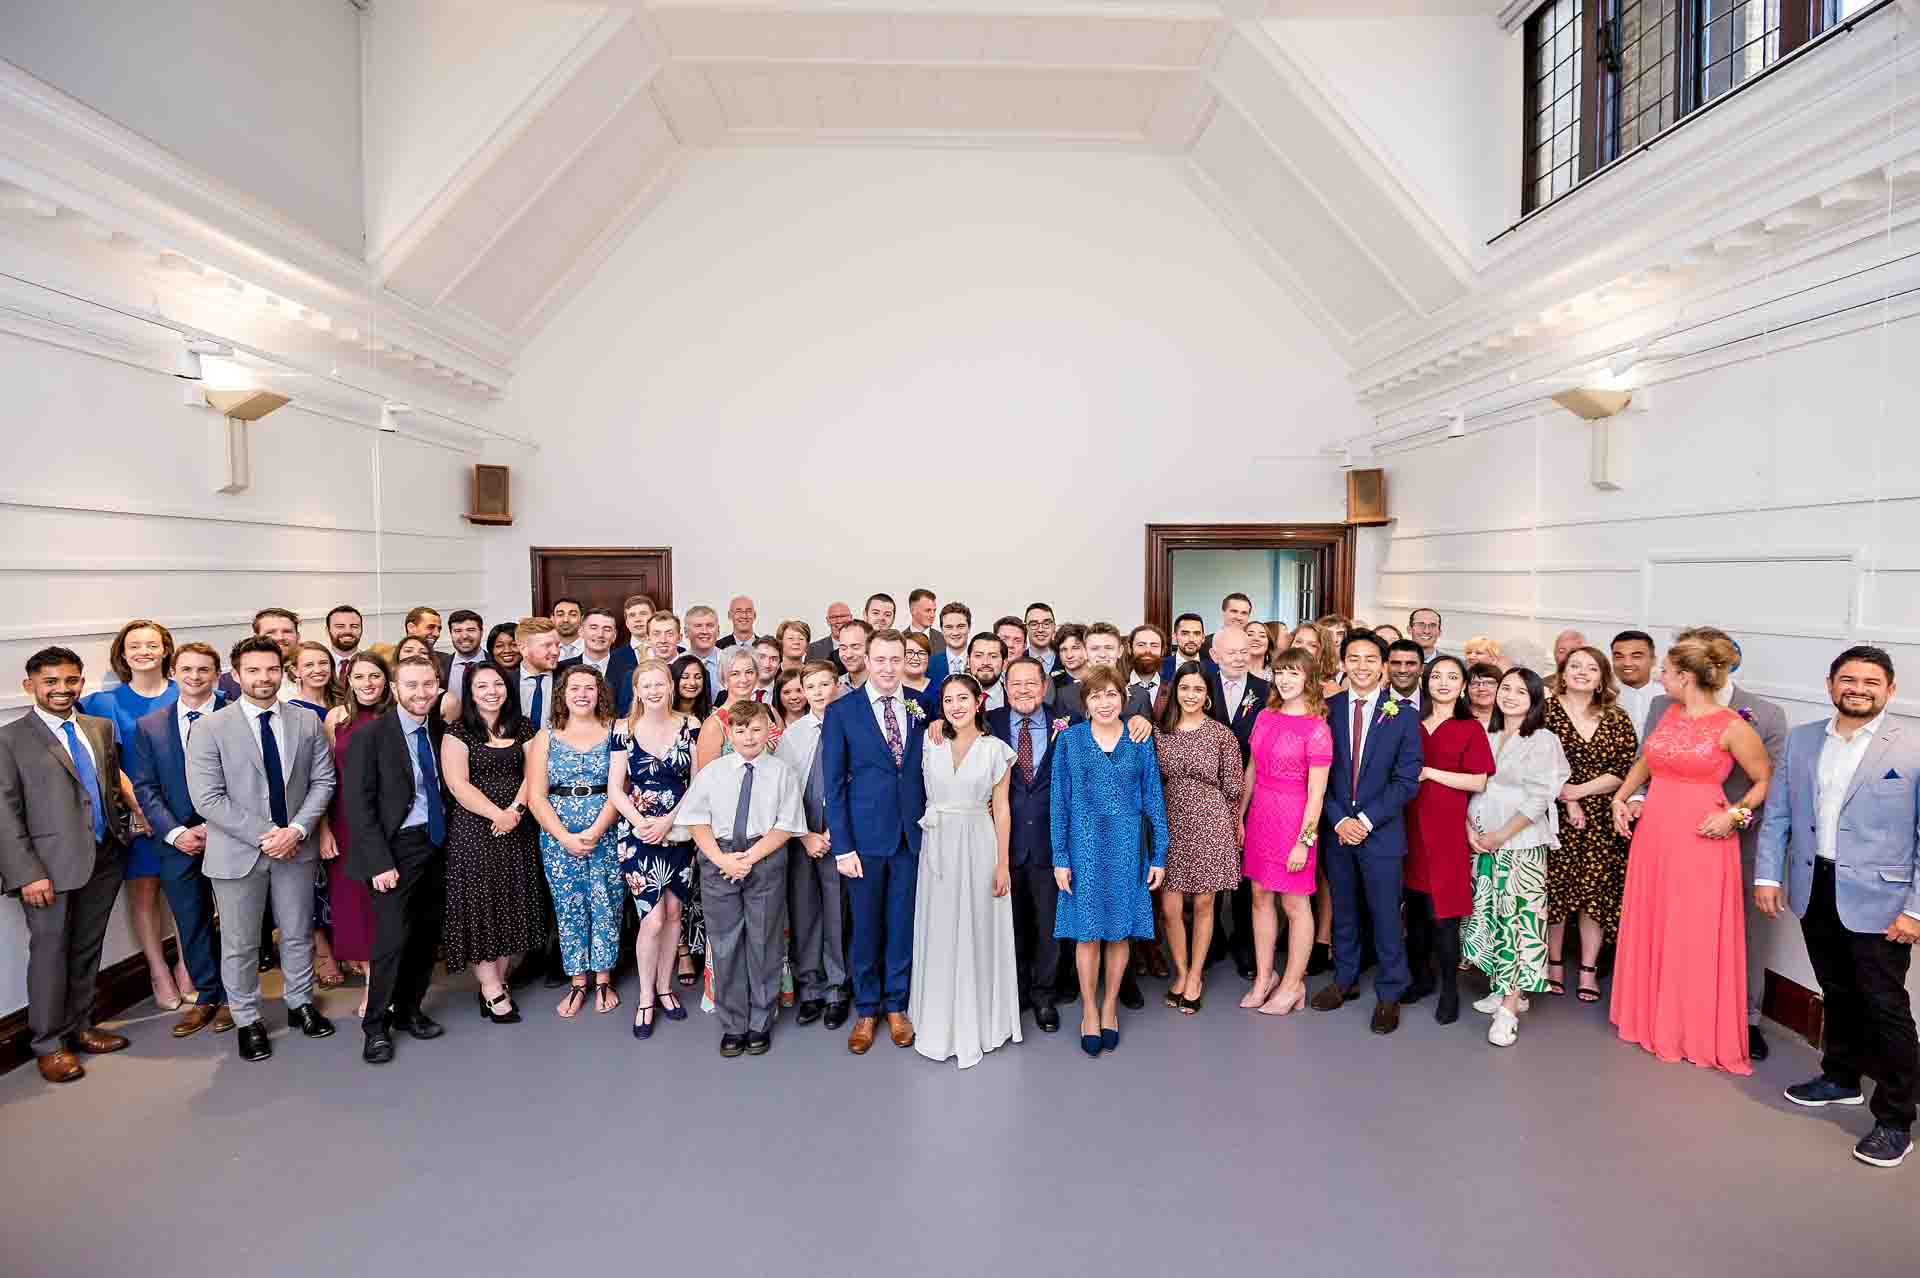 Entire wedding party posed for photo at Fulham Library wedding